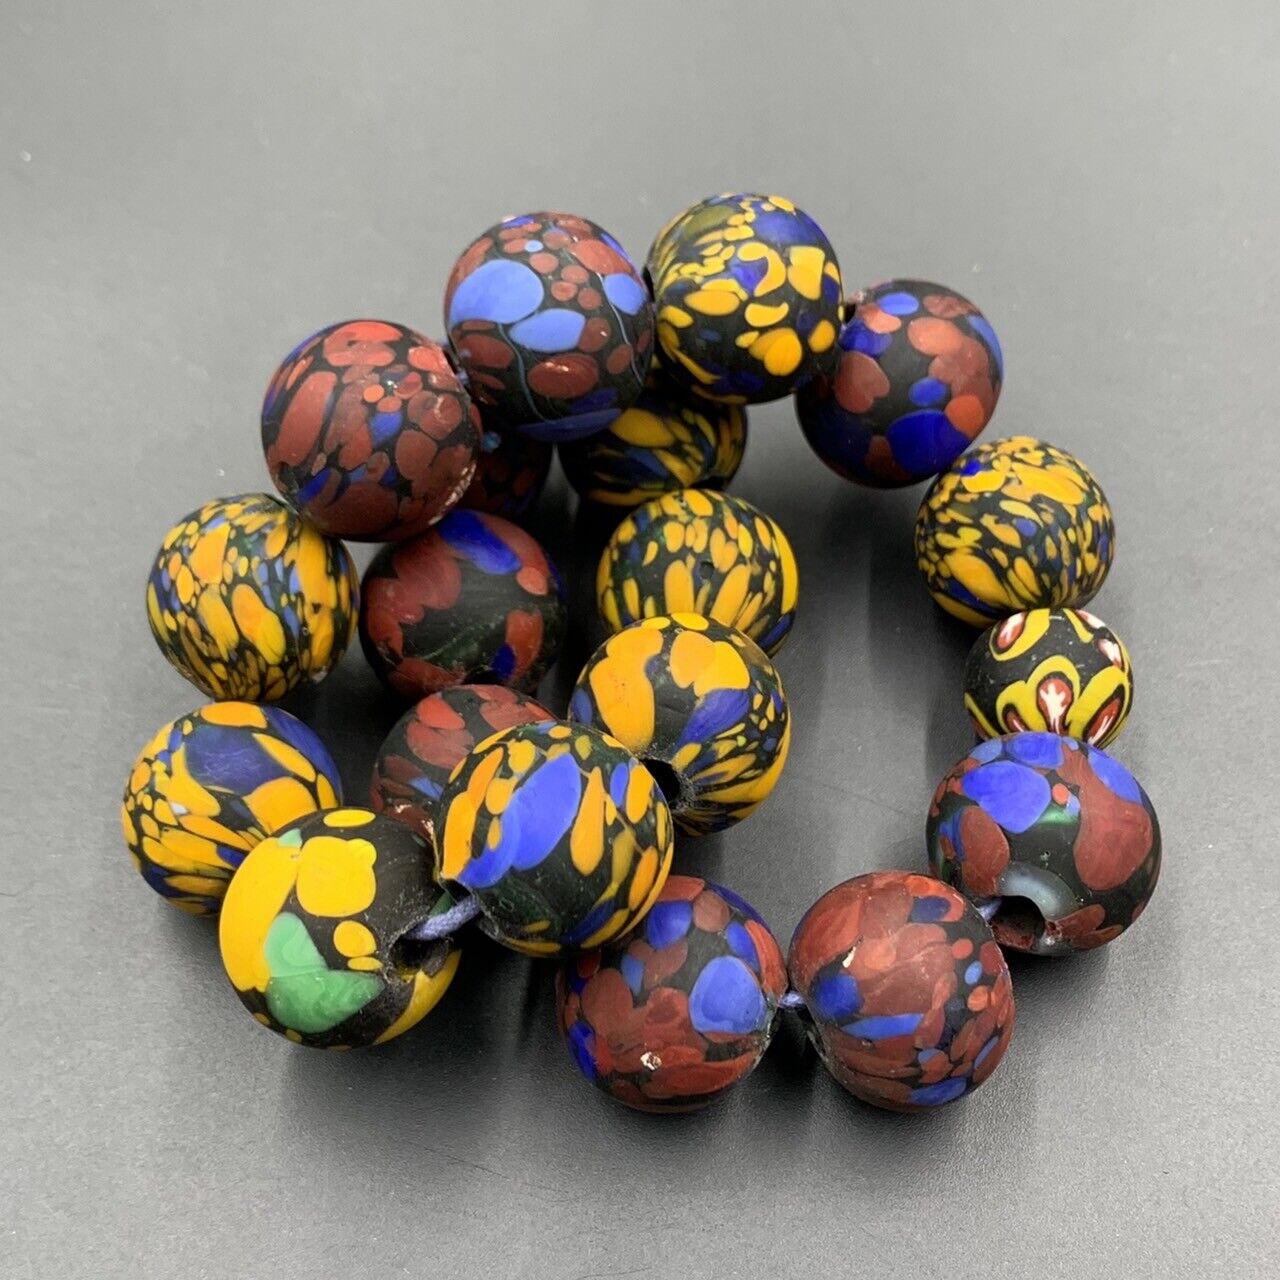 Beautiful Vintage Glass Beads. Collectible Glass Beads, Awesome Texture